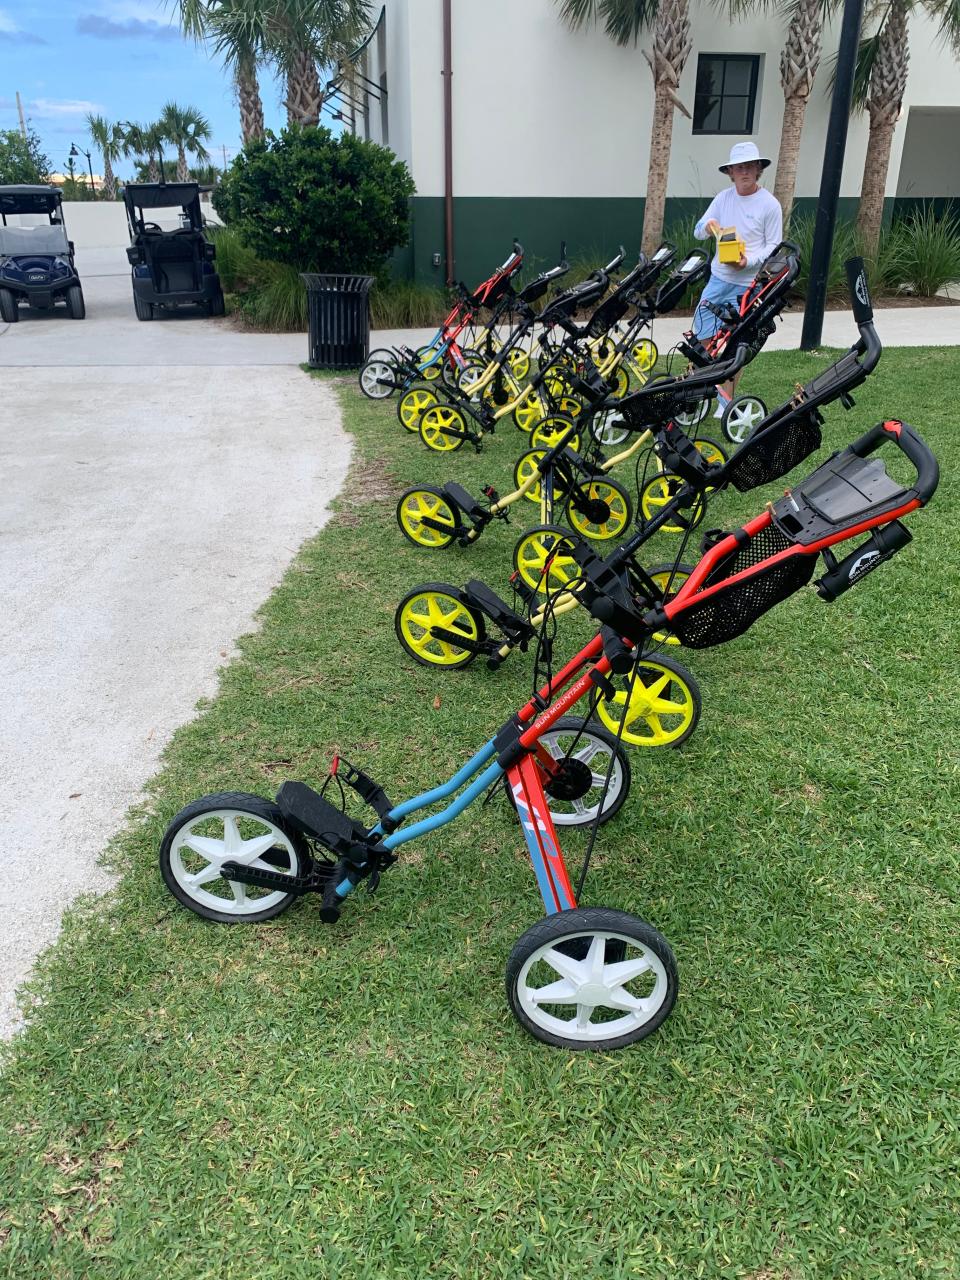 At West Palm Beach's new golf course The Park, golfers can use a push cart free of charge if they choose to walk.